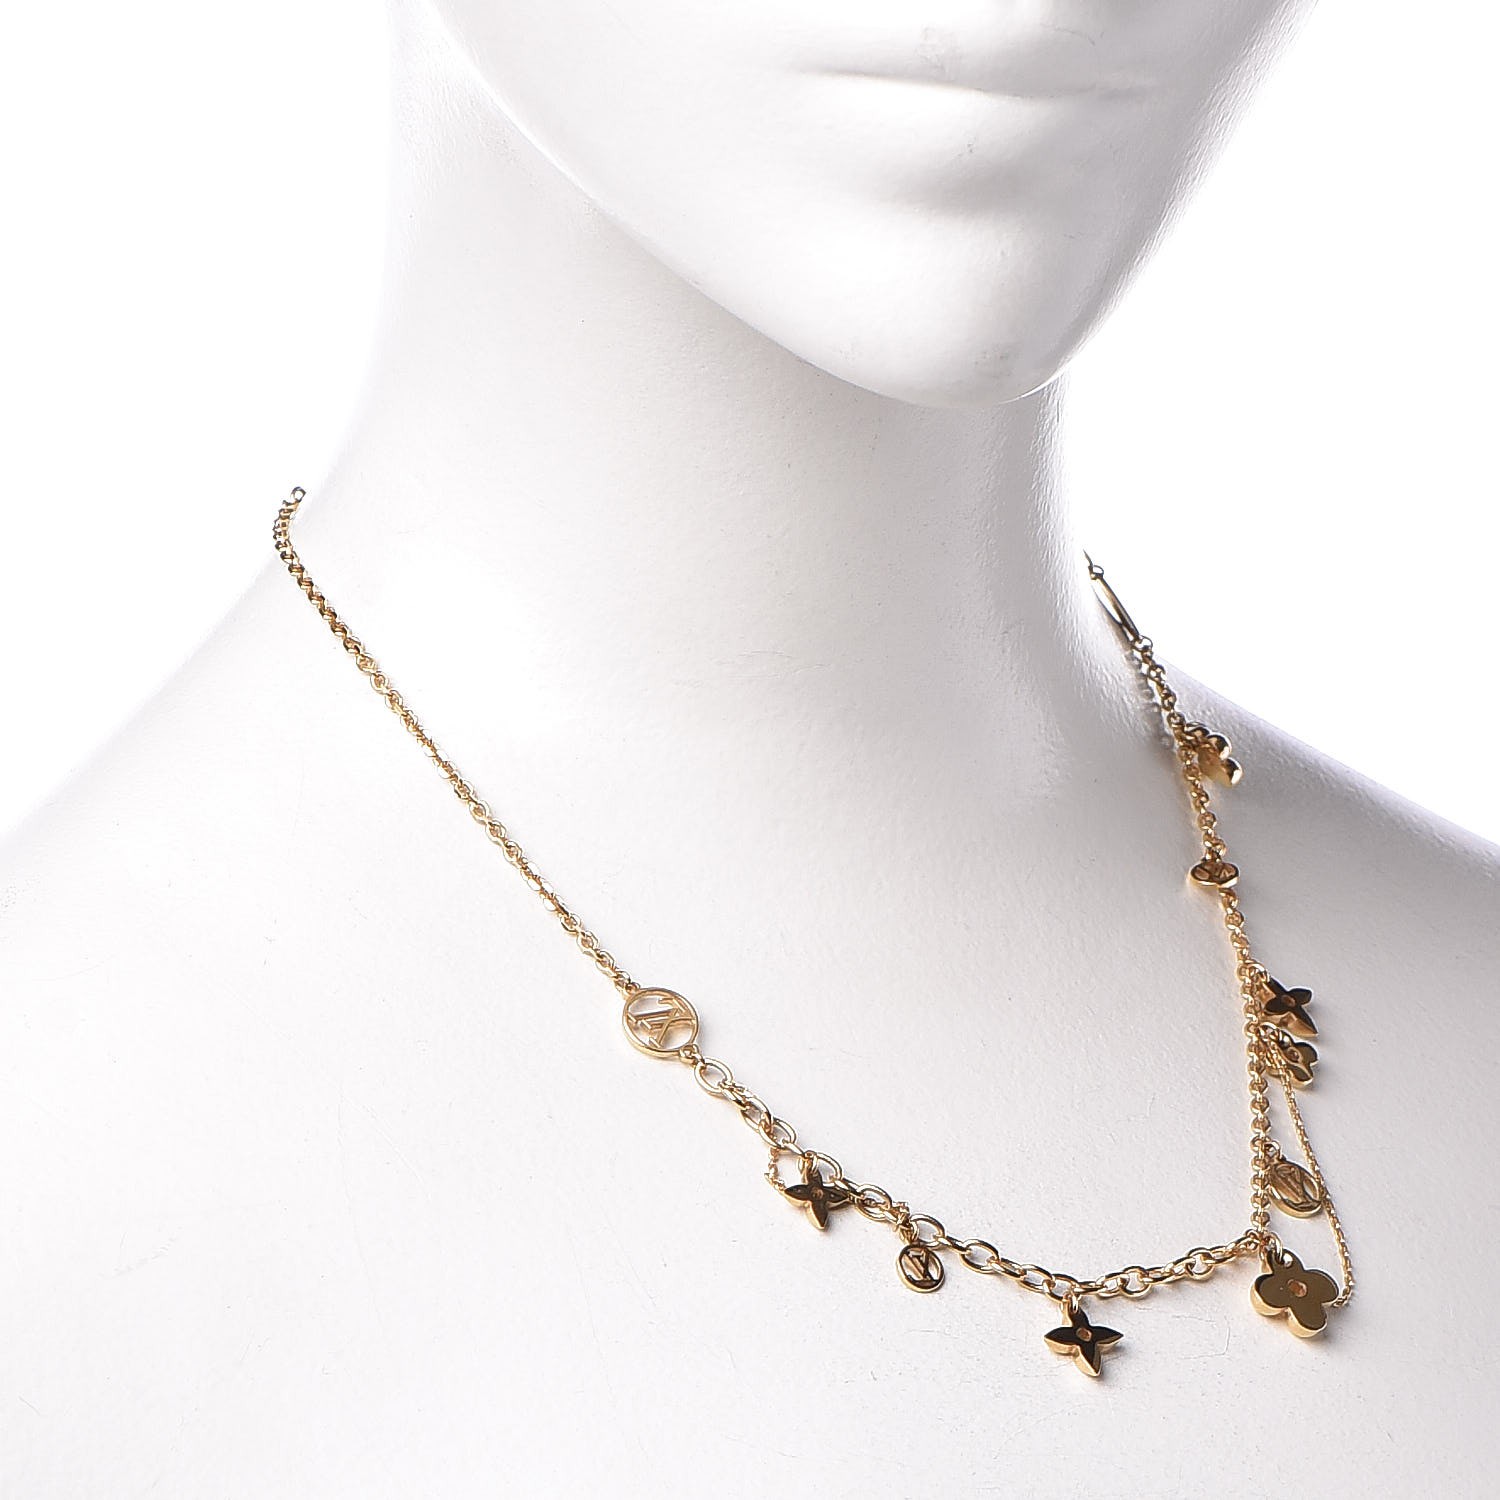 LV Trainer Strass Necklace S00 - Fashion Jewelry